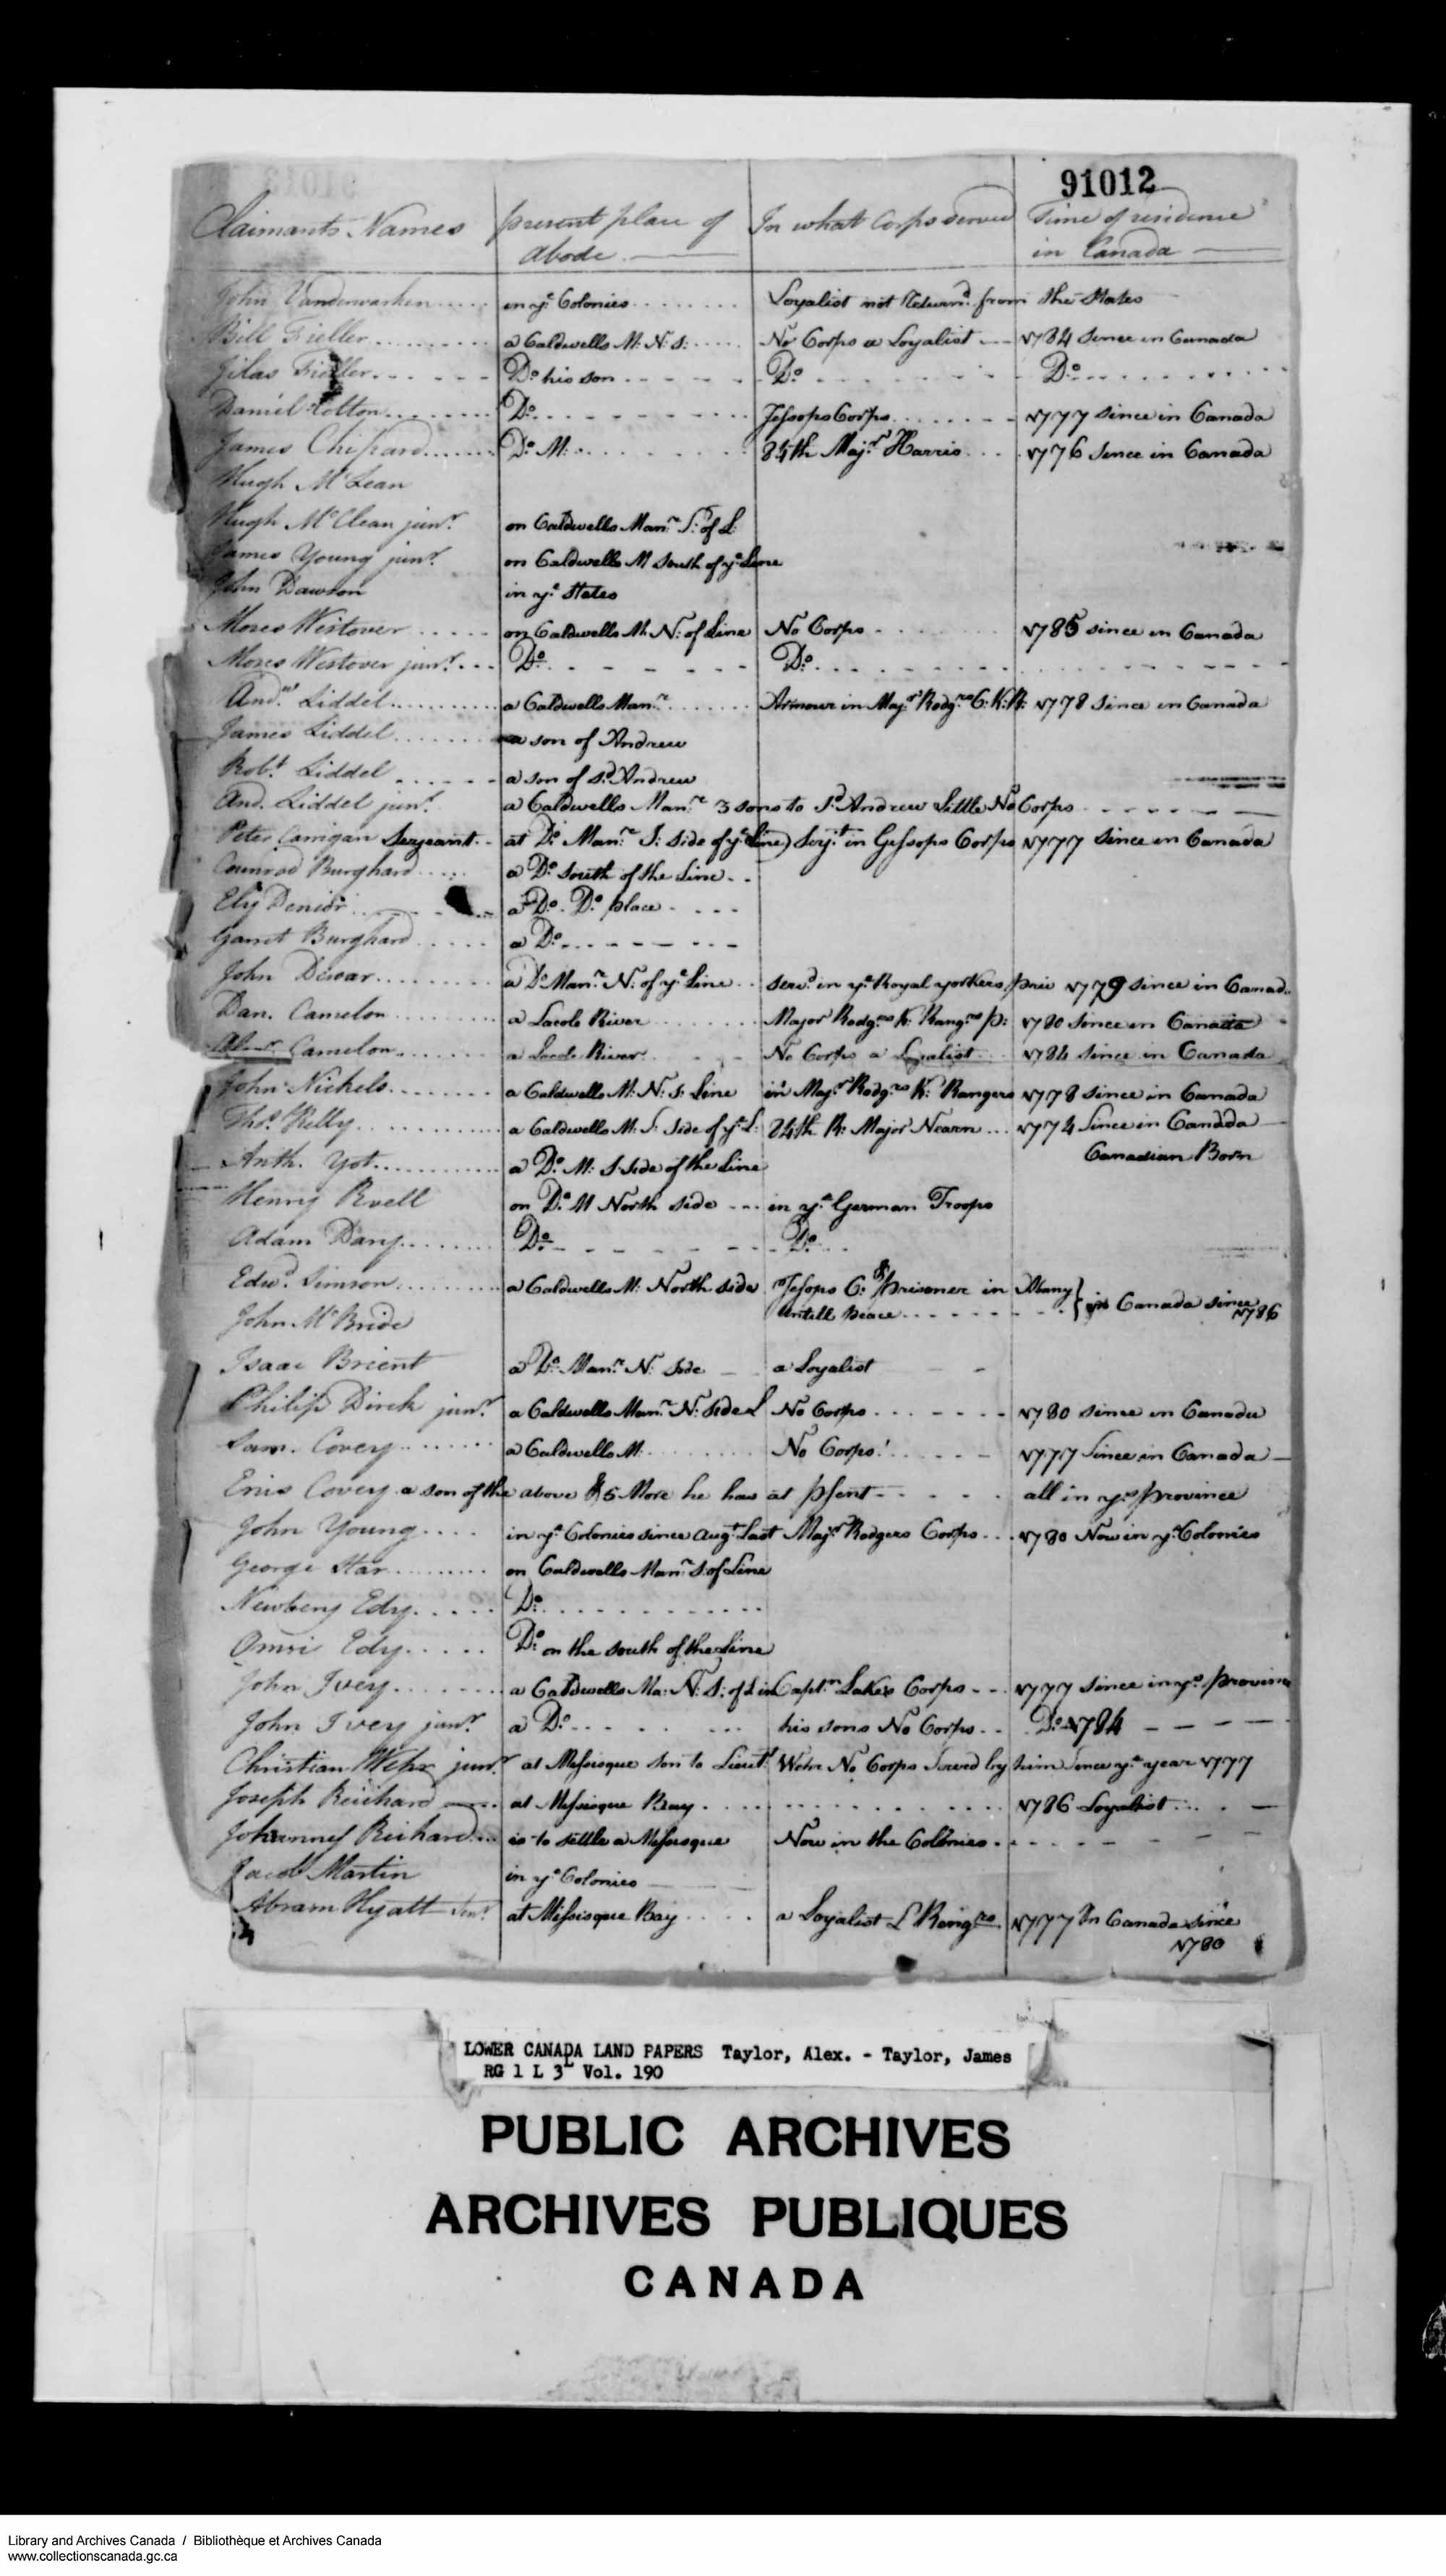 Digitized page of  for Image No.: e008738196